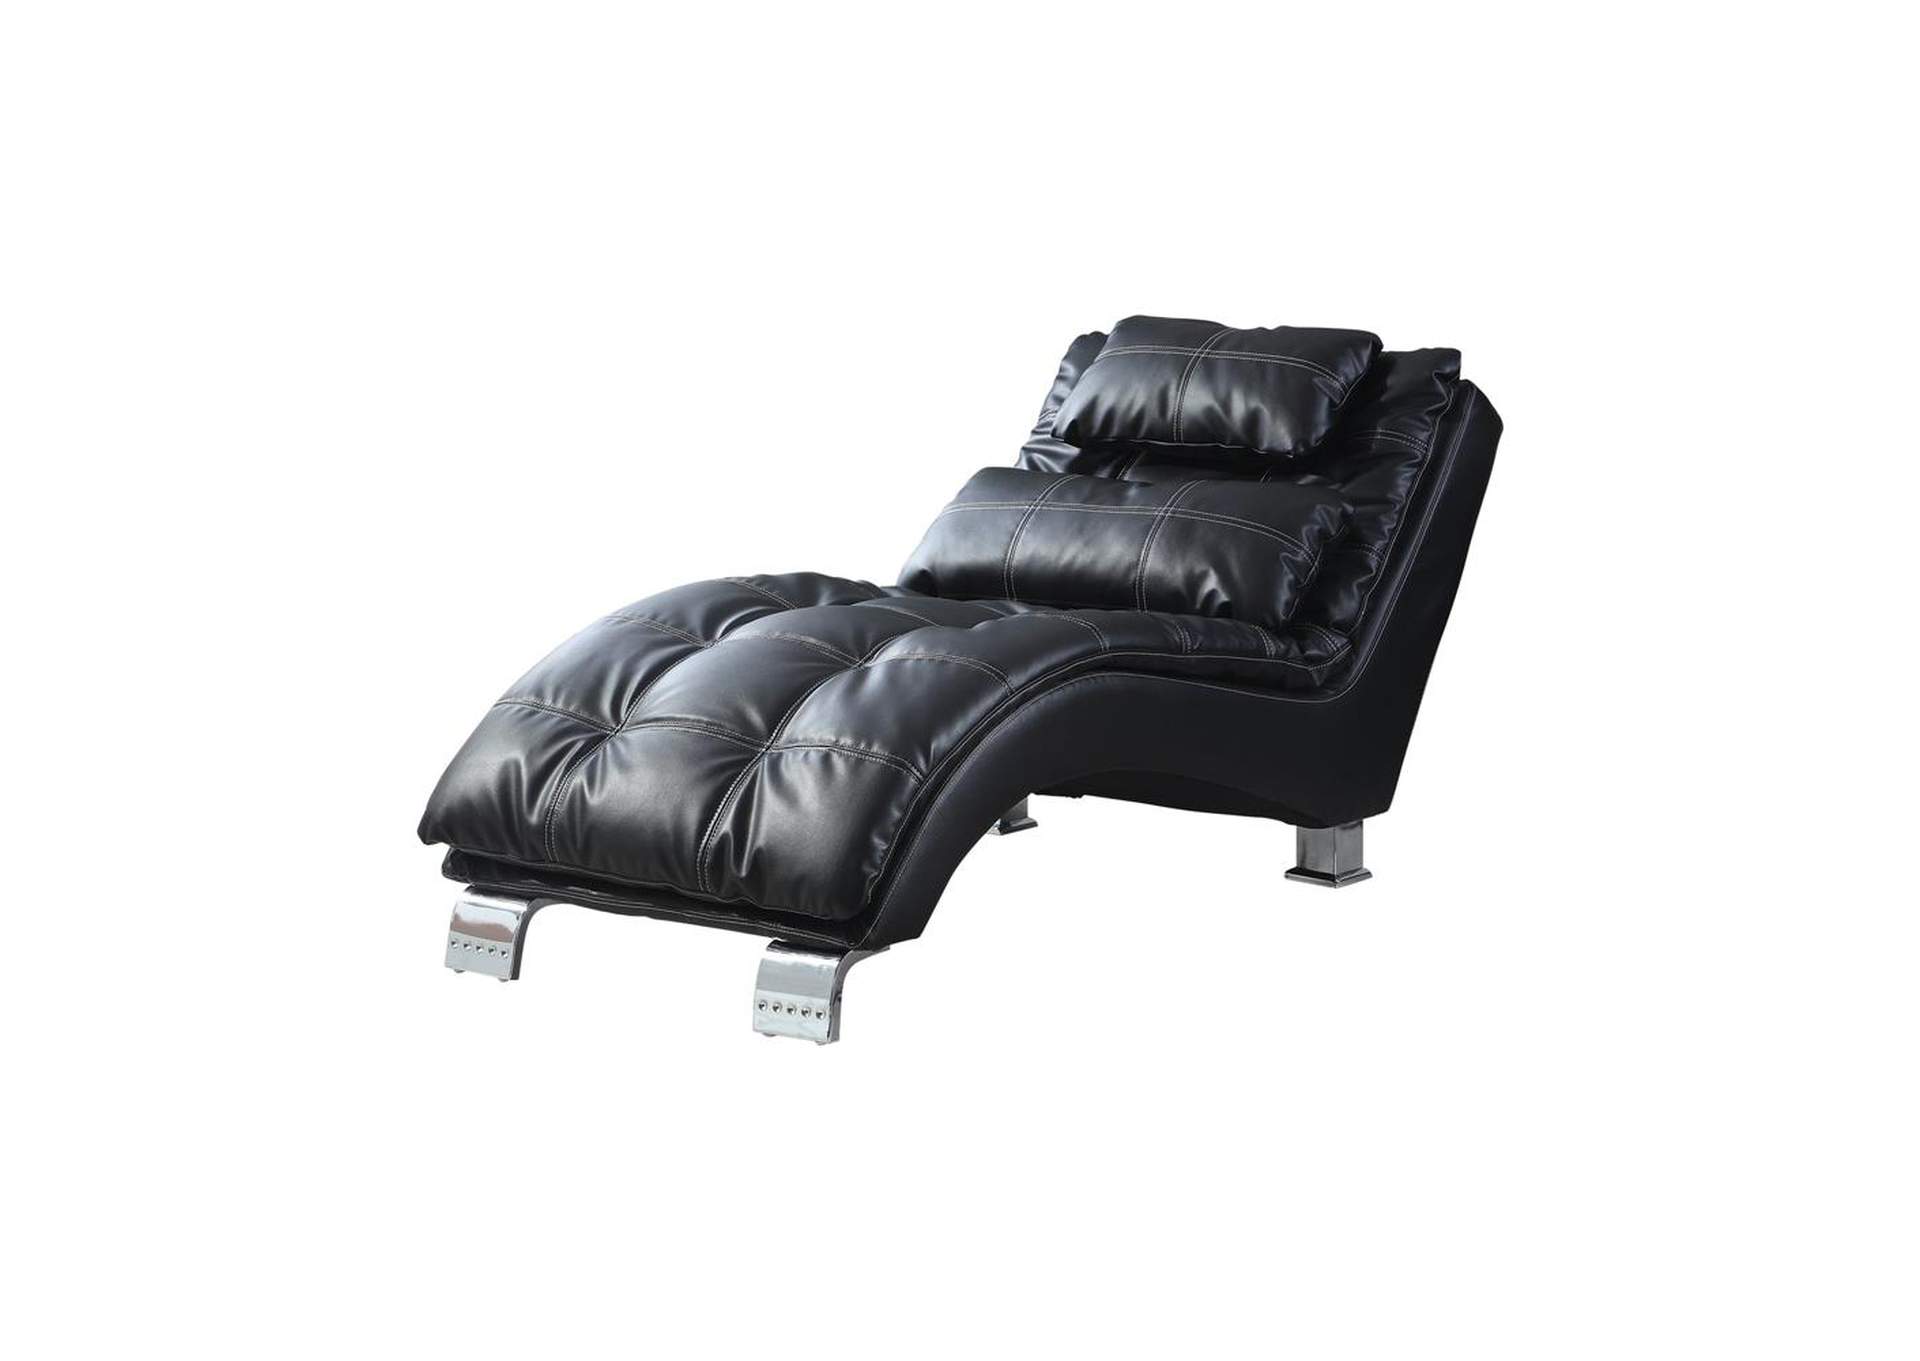 Chrome Contemporary Black Faux Leather Chaise,Coaster Furniture